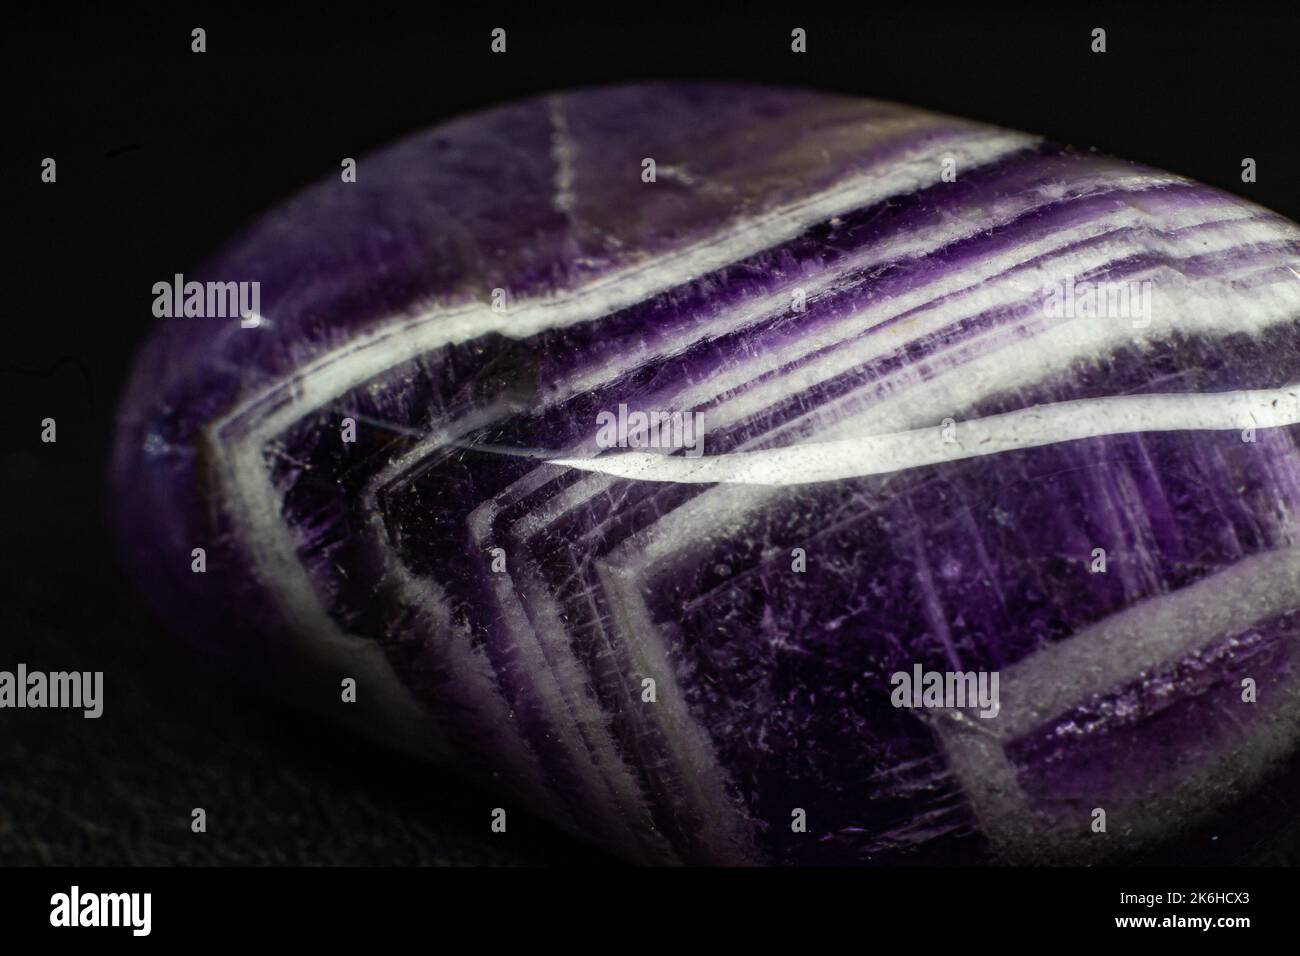 Real tumbled purple and white chevron amethyst focused on black surface macro Stock Photo